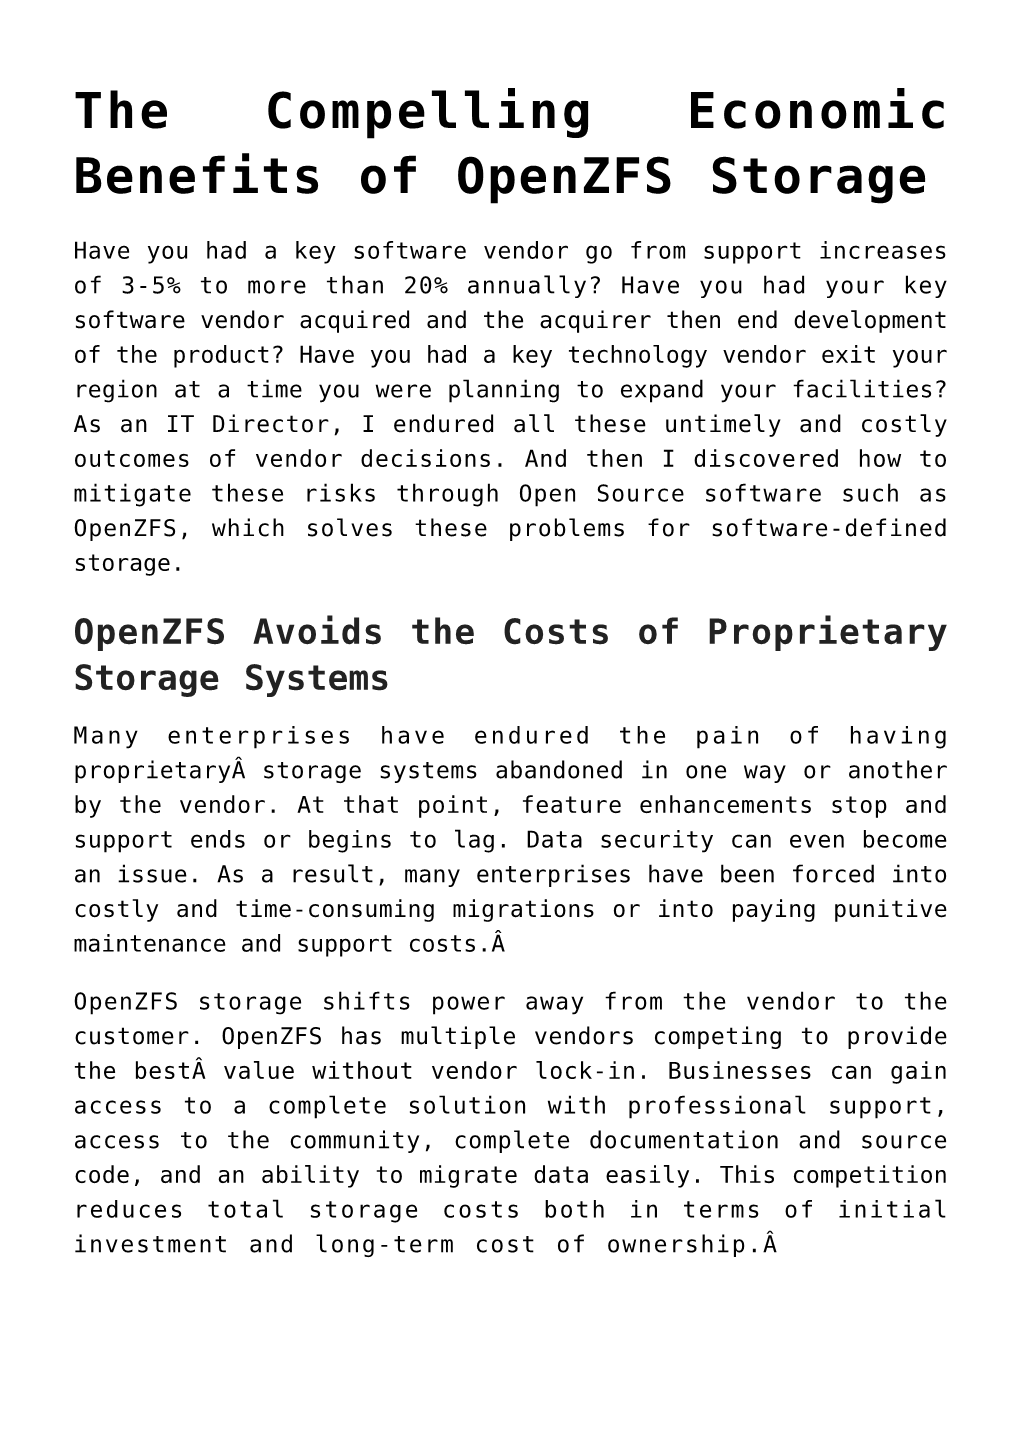 The Compelling Economic Benefits of Openzfs Storage